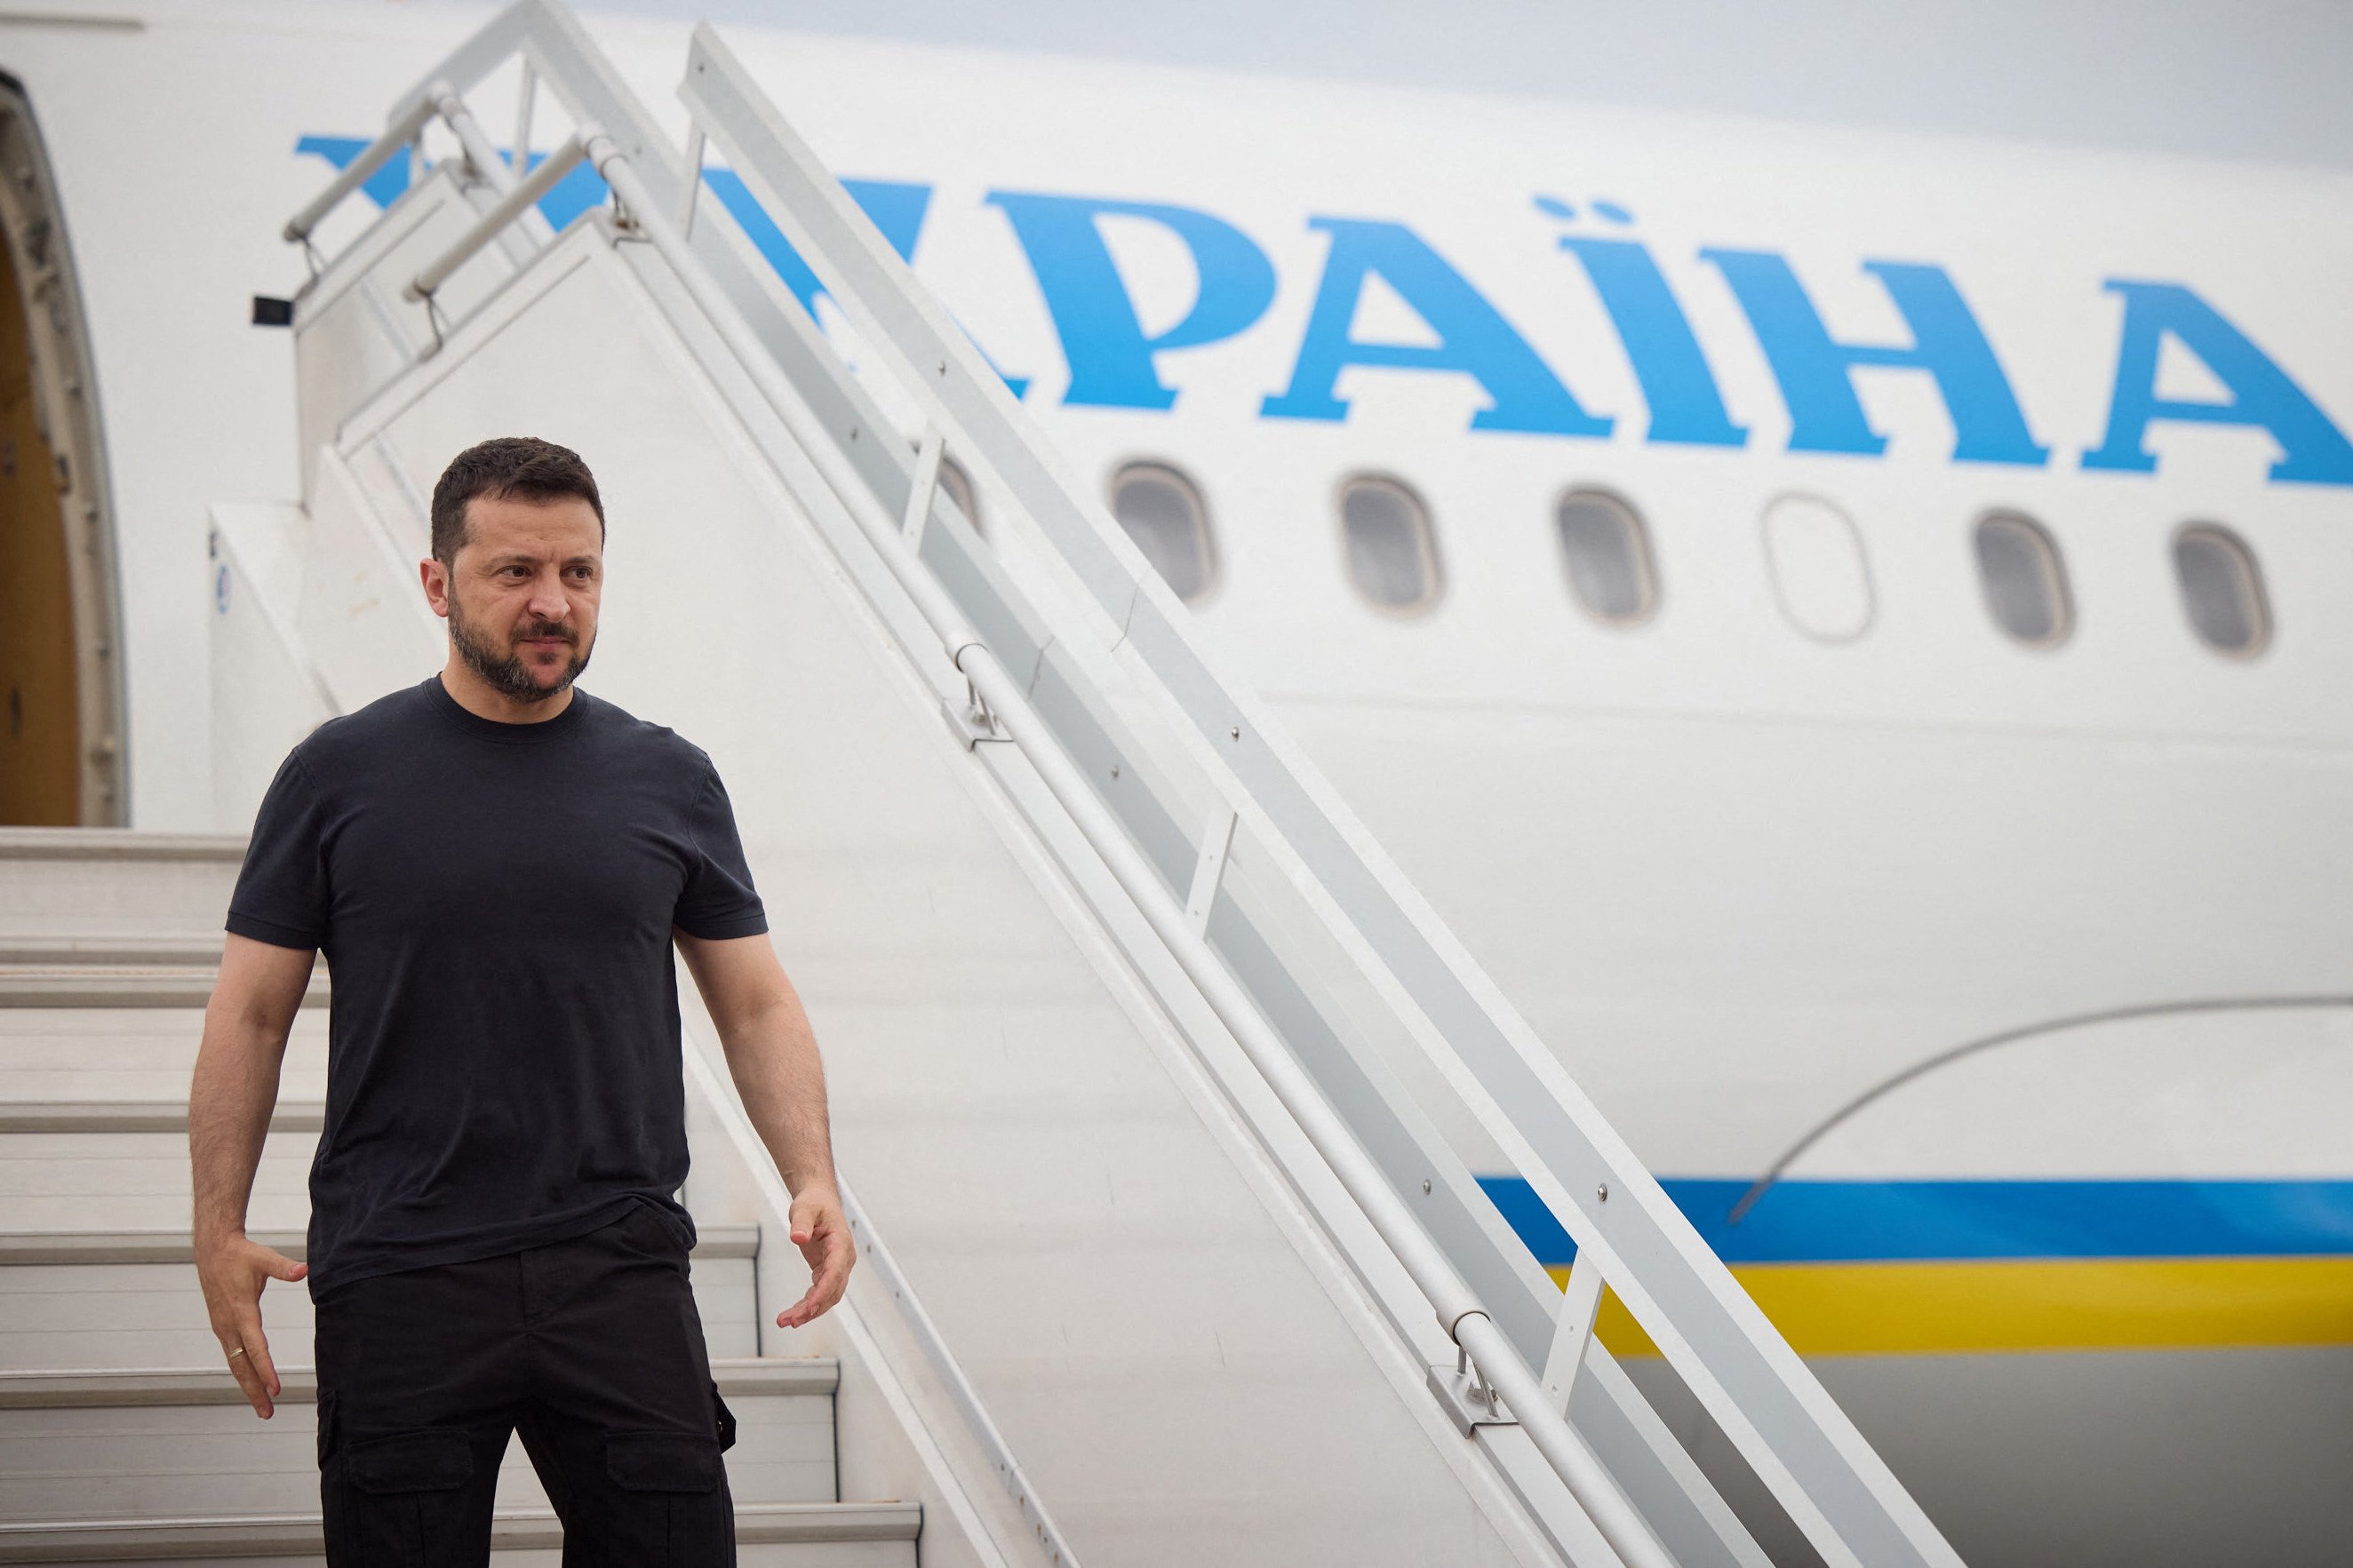 Ukrainian President Volodymyr Zelensky arriving in Singapore to attend the Shangri-La Dialogue on Saturday. Photo: AFP